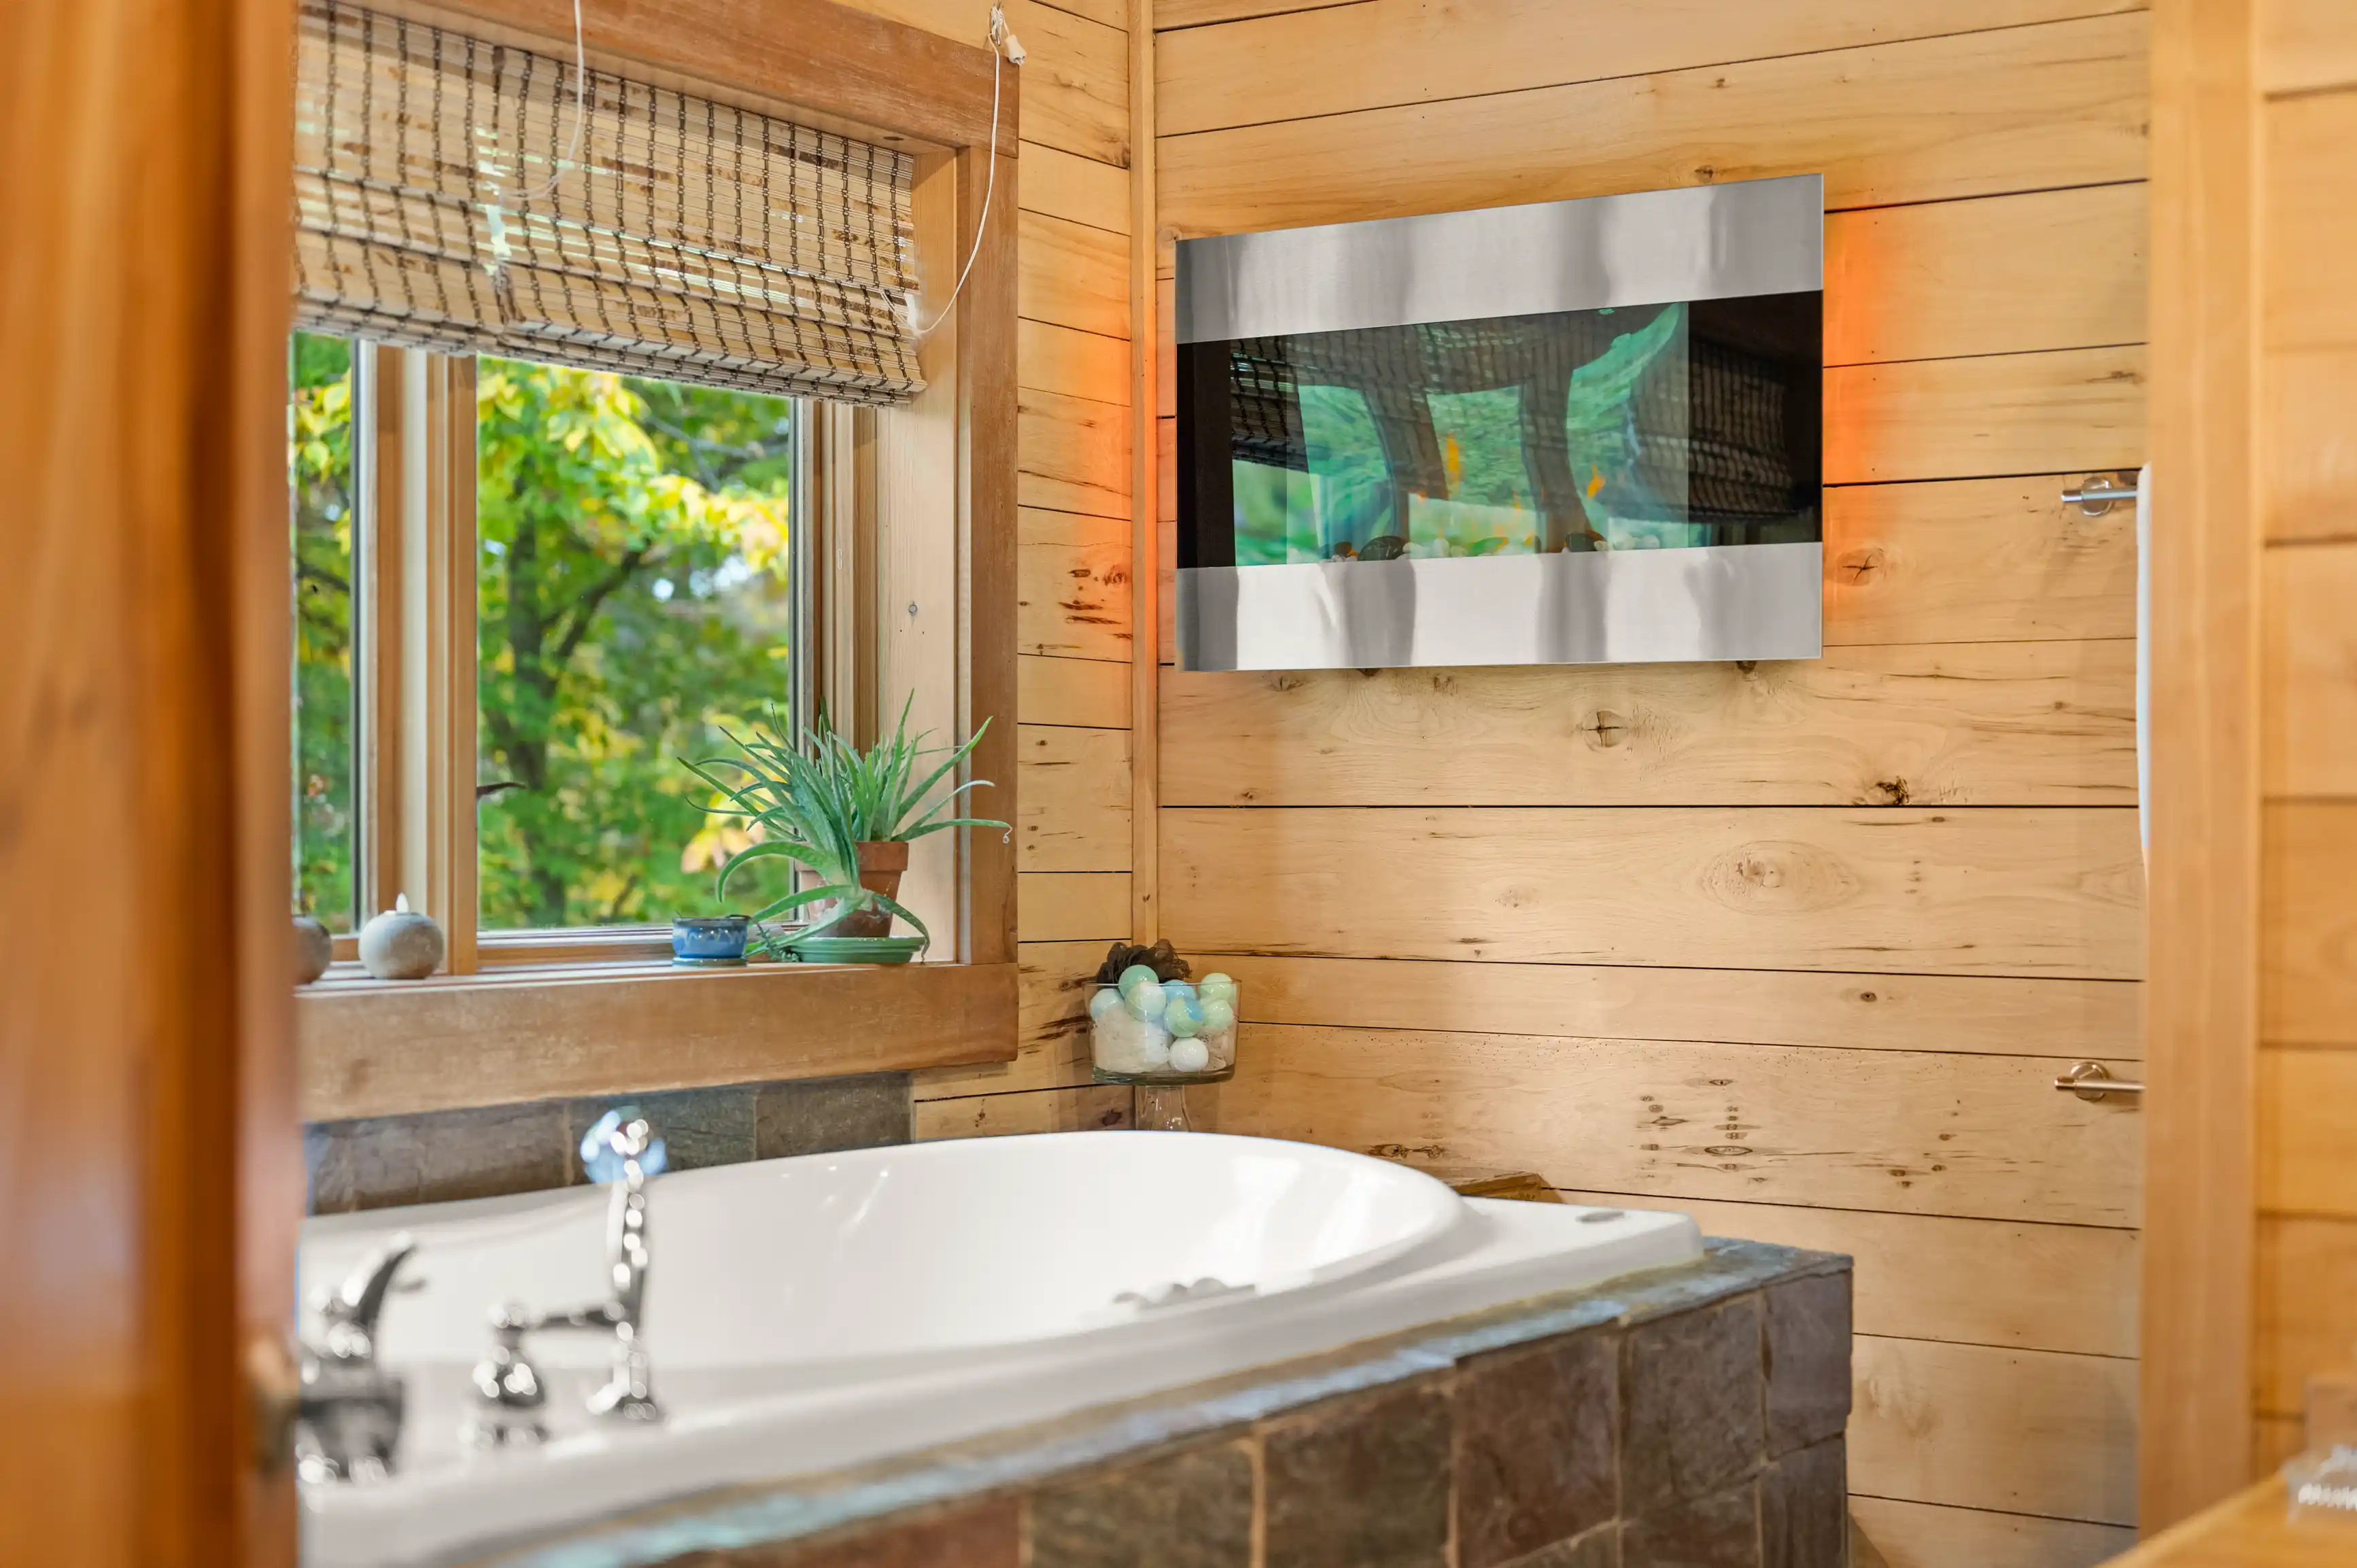 Interior of a rustic bathroom with a wooden bathtub surround, matching wooden walls, a plant on the windowsill, and a modern mirror above the tub.